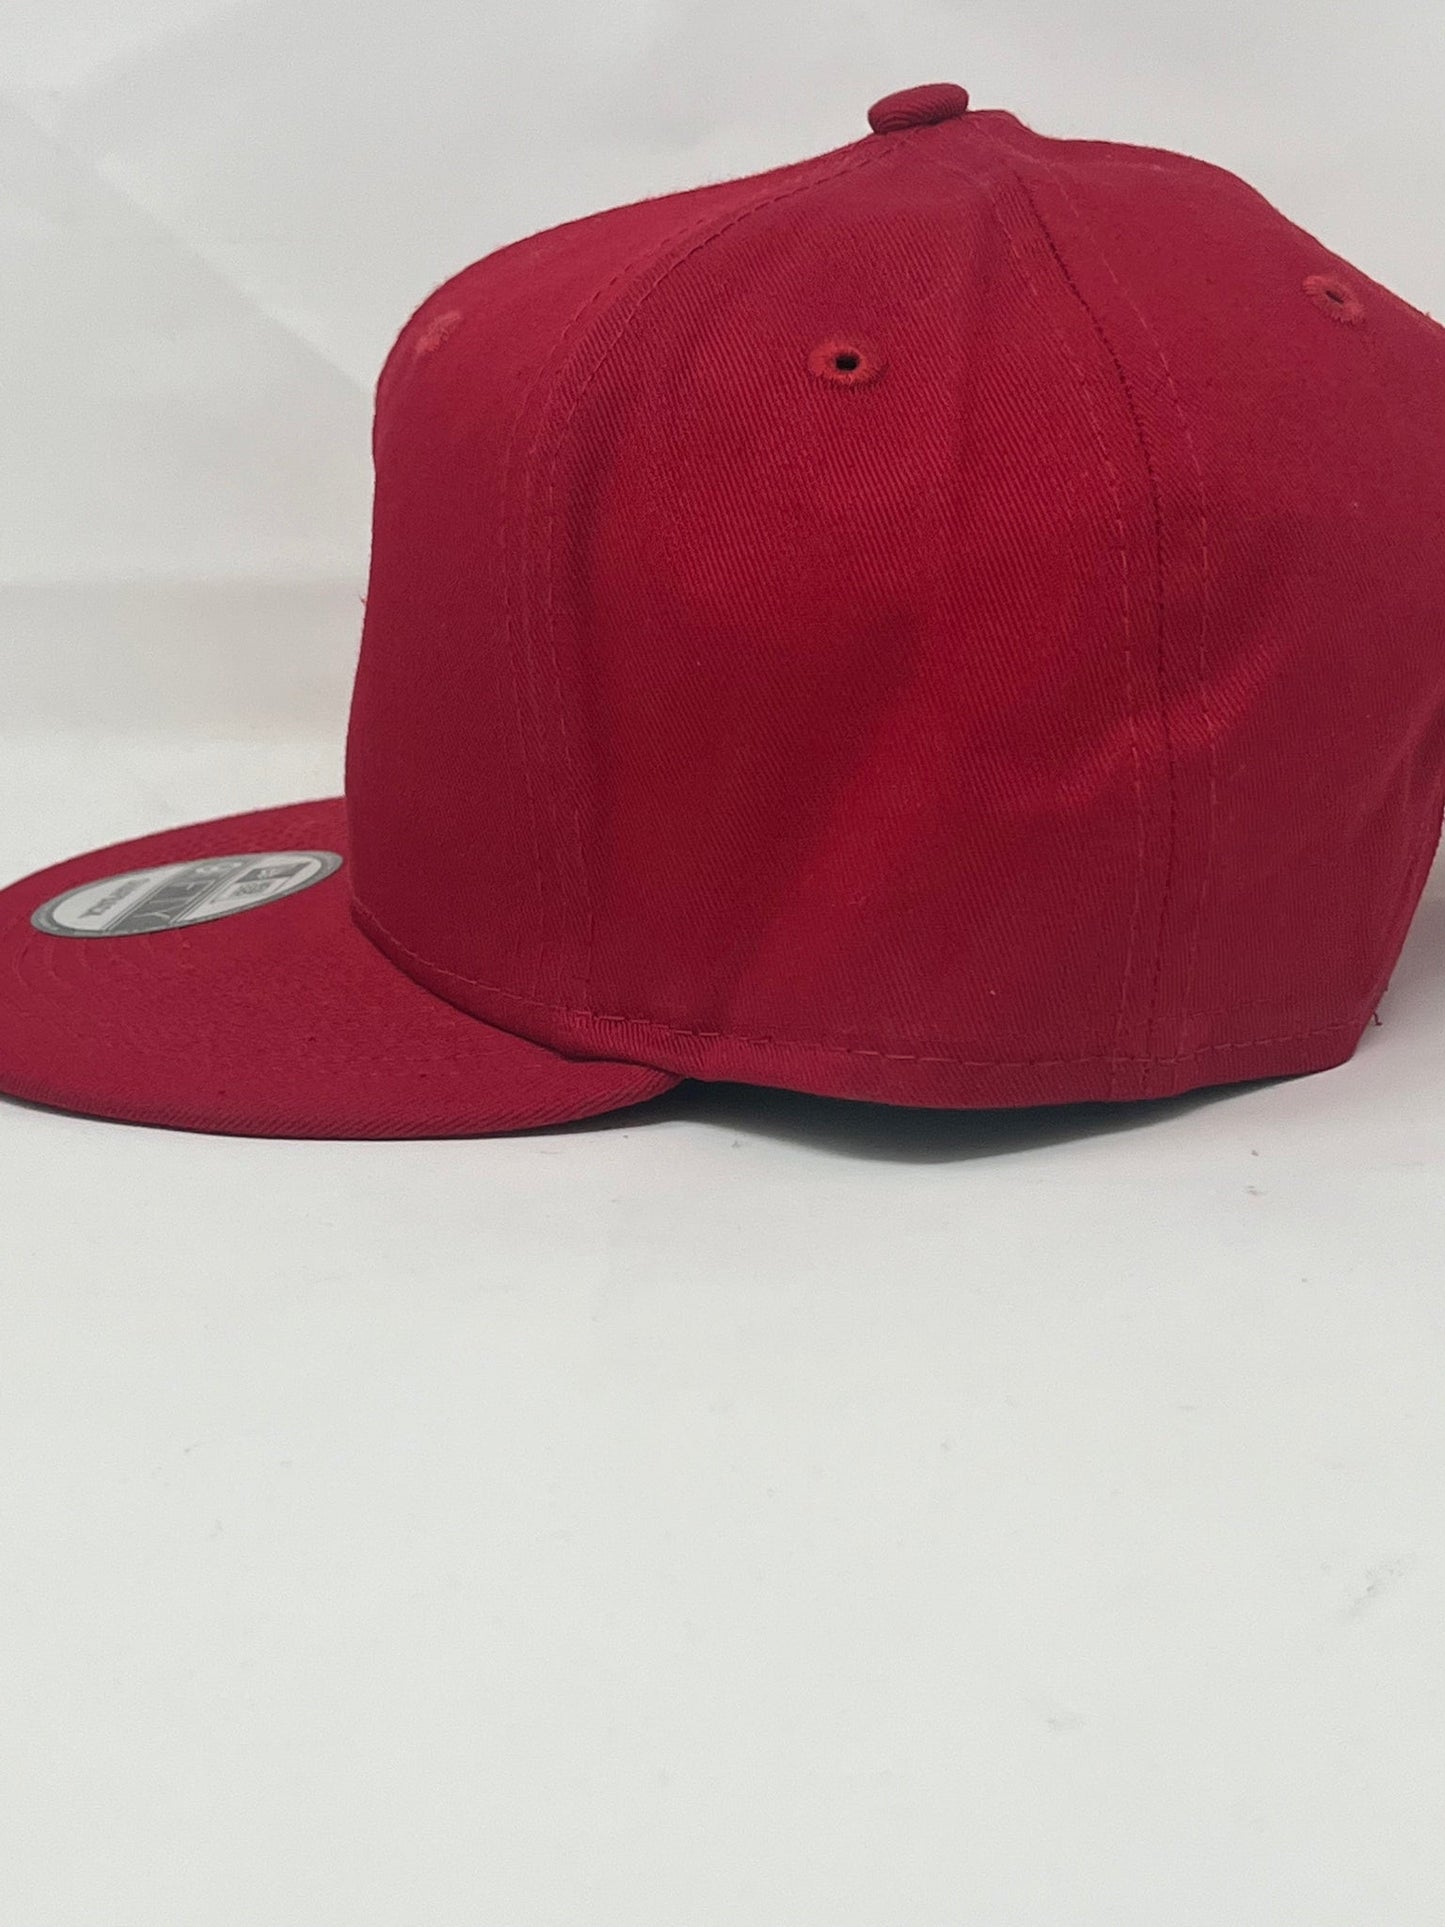 Urban Edge Snapback with Emblematic Shield Design - Red Hat